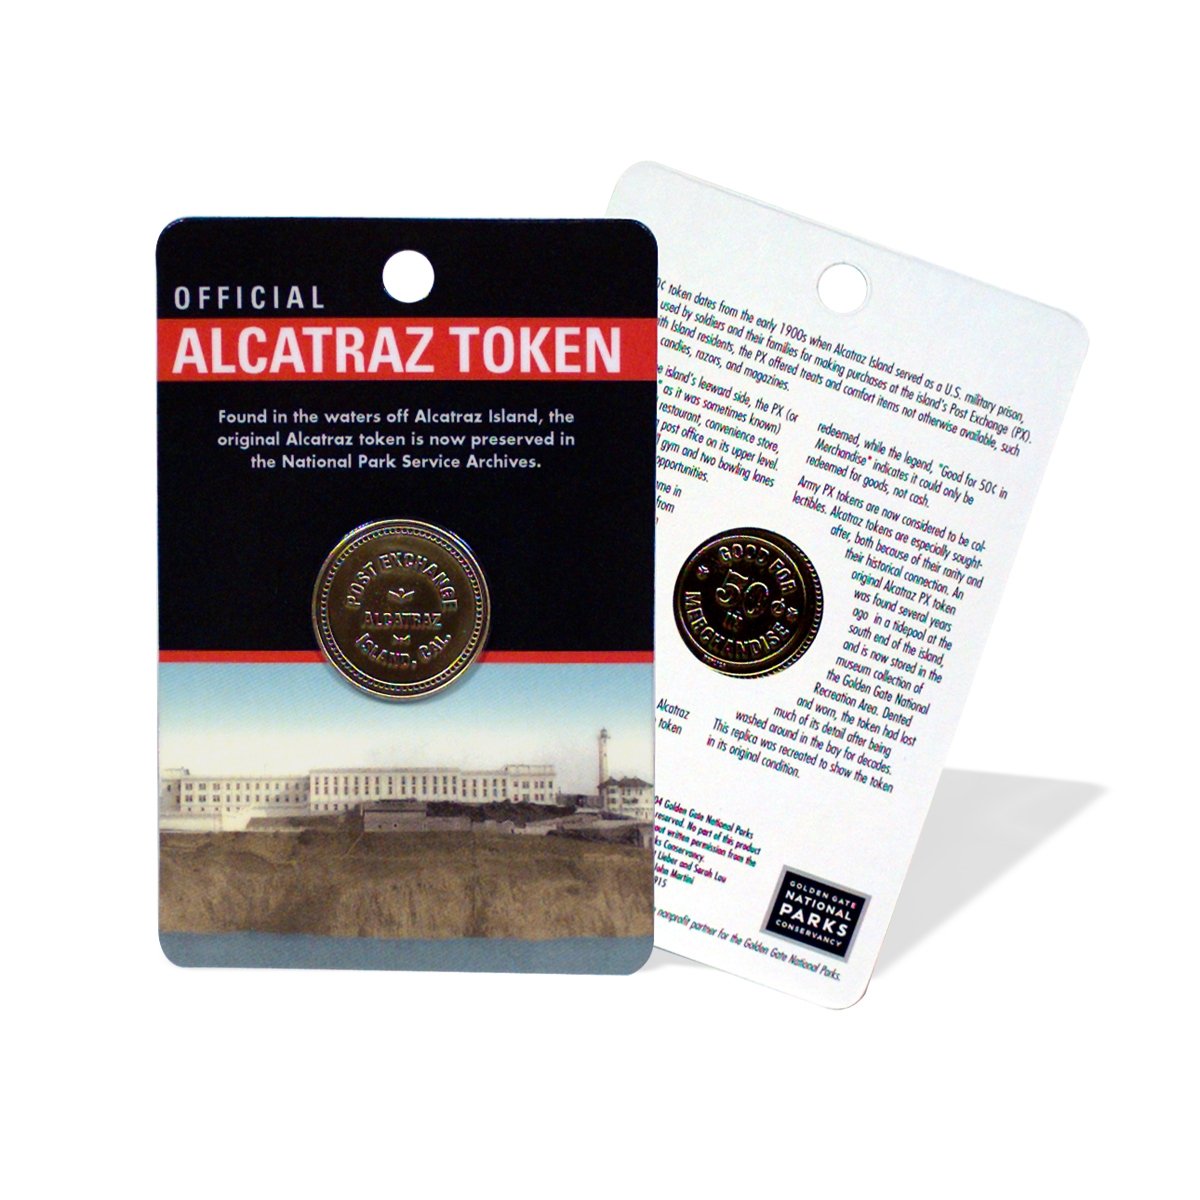 Replica Alcatraz post exchange token inspired by early 20th century artifact used during the island's army years.